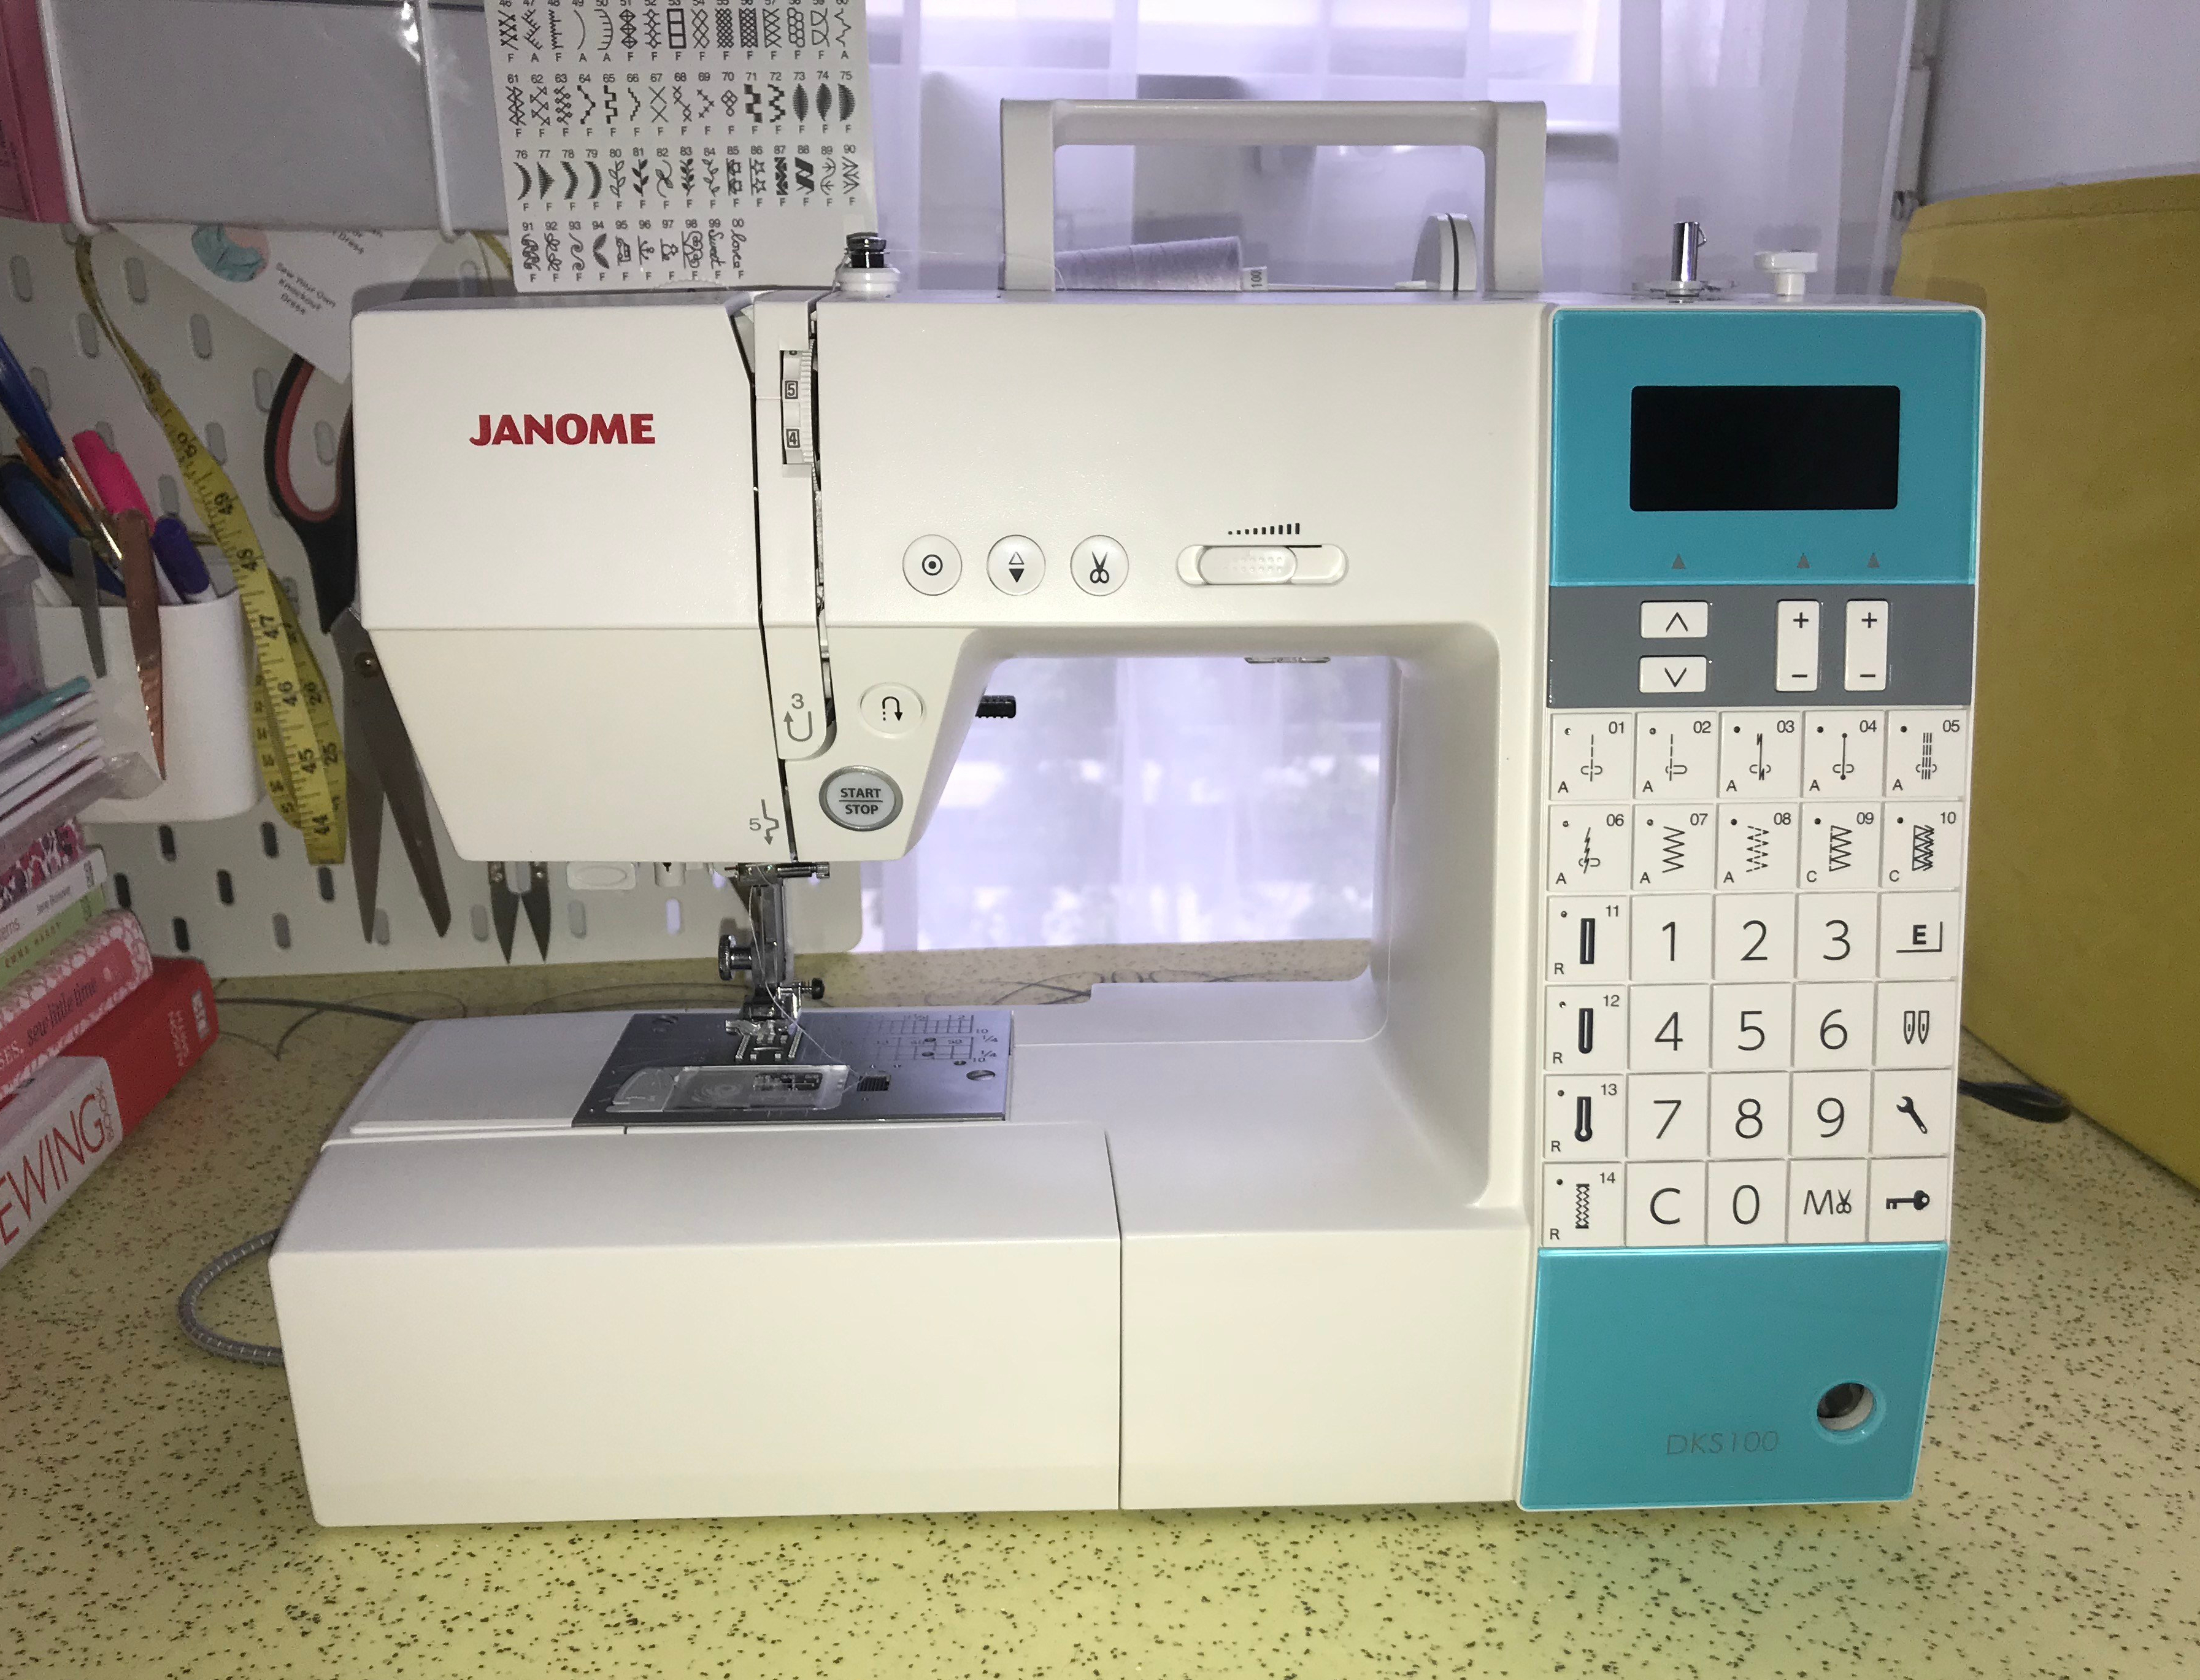 Janome DKS100 Turquoise Blue Sewing Machine